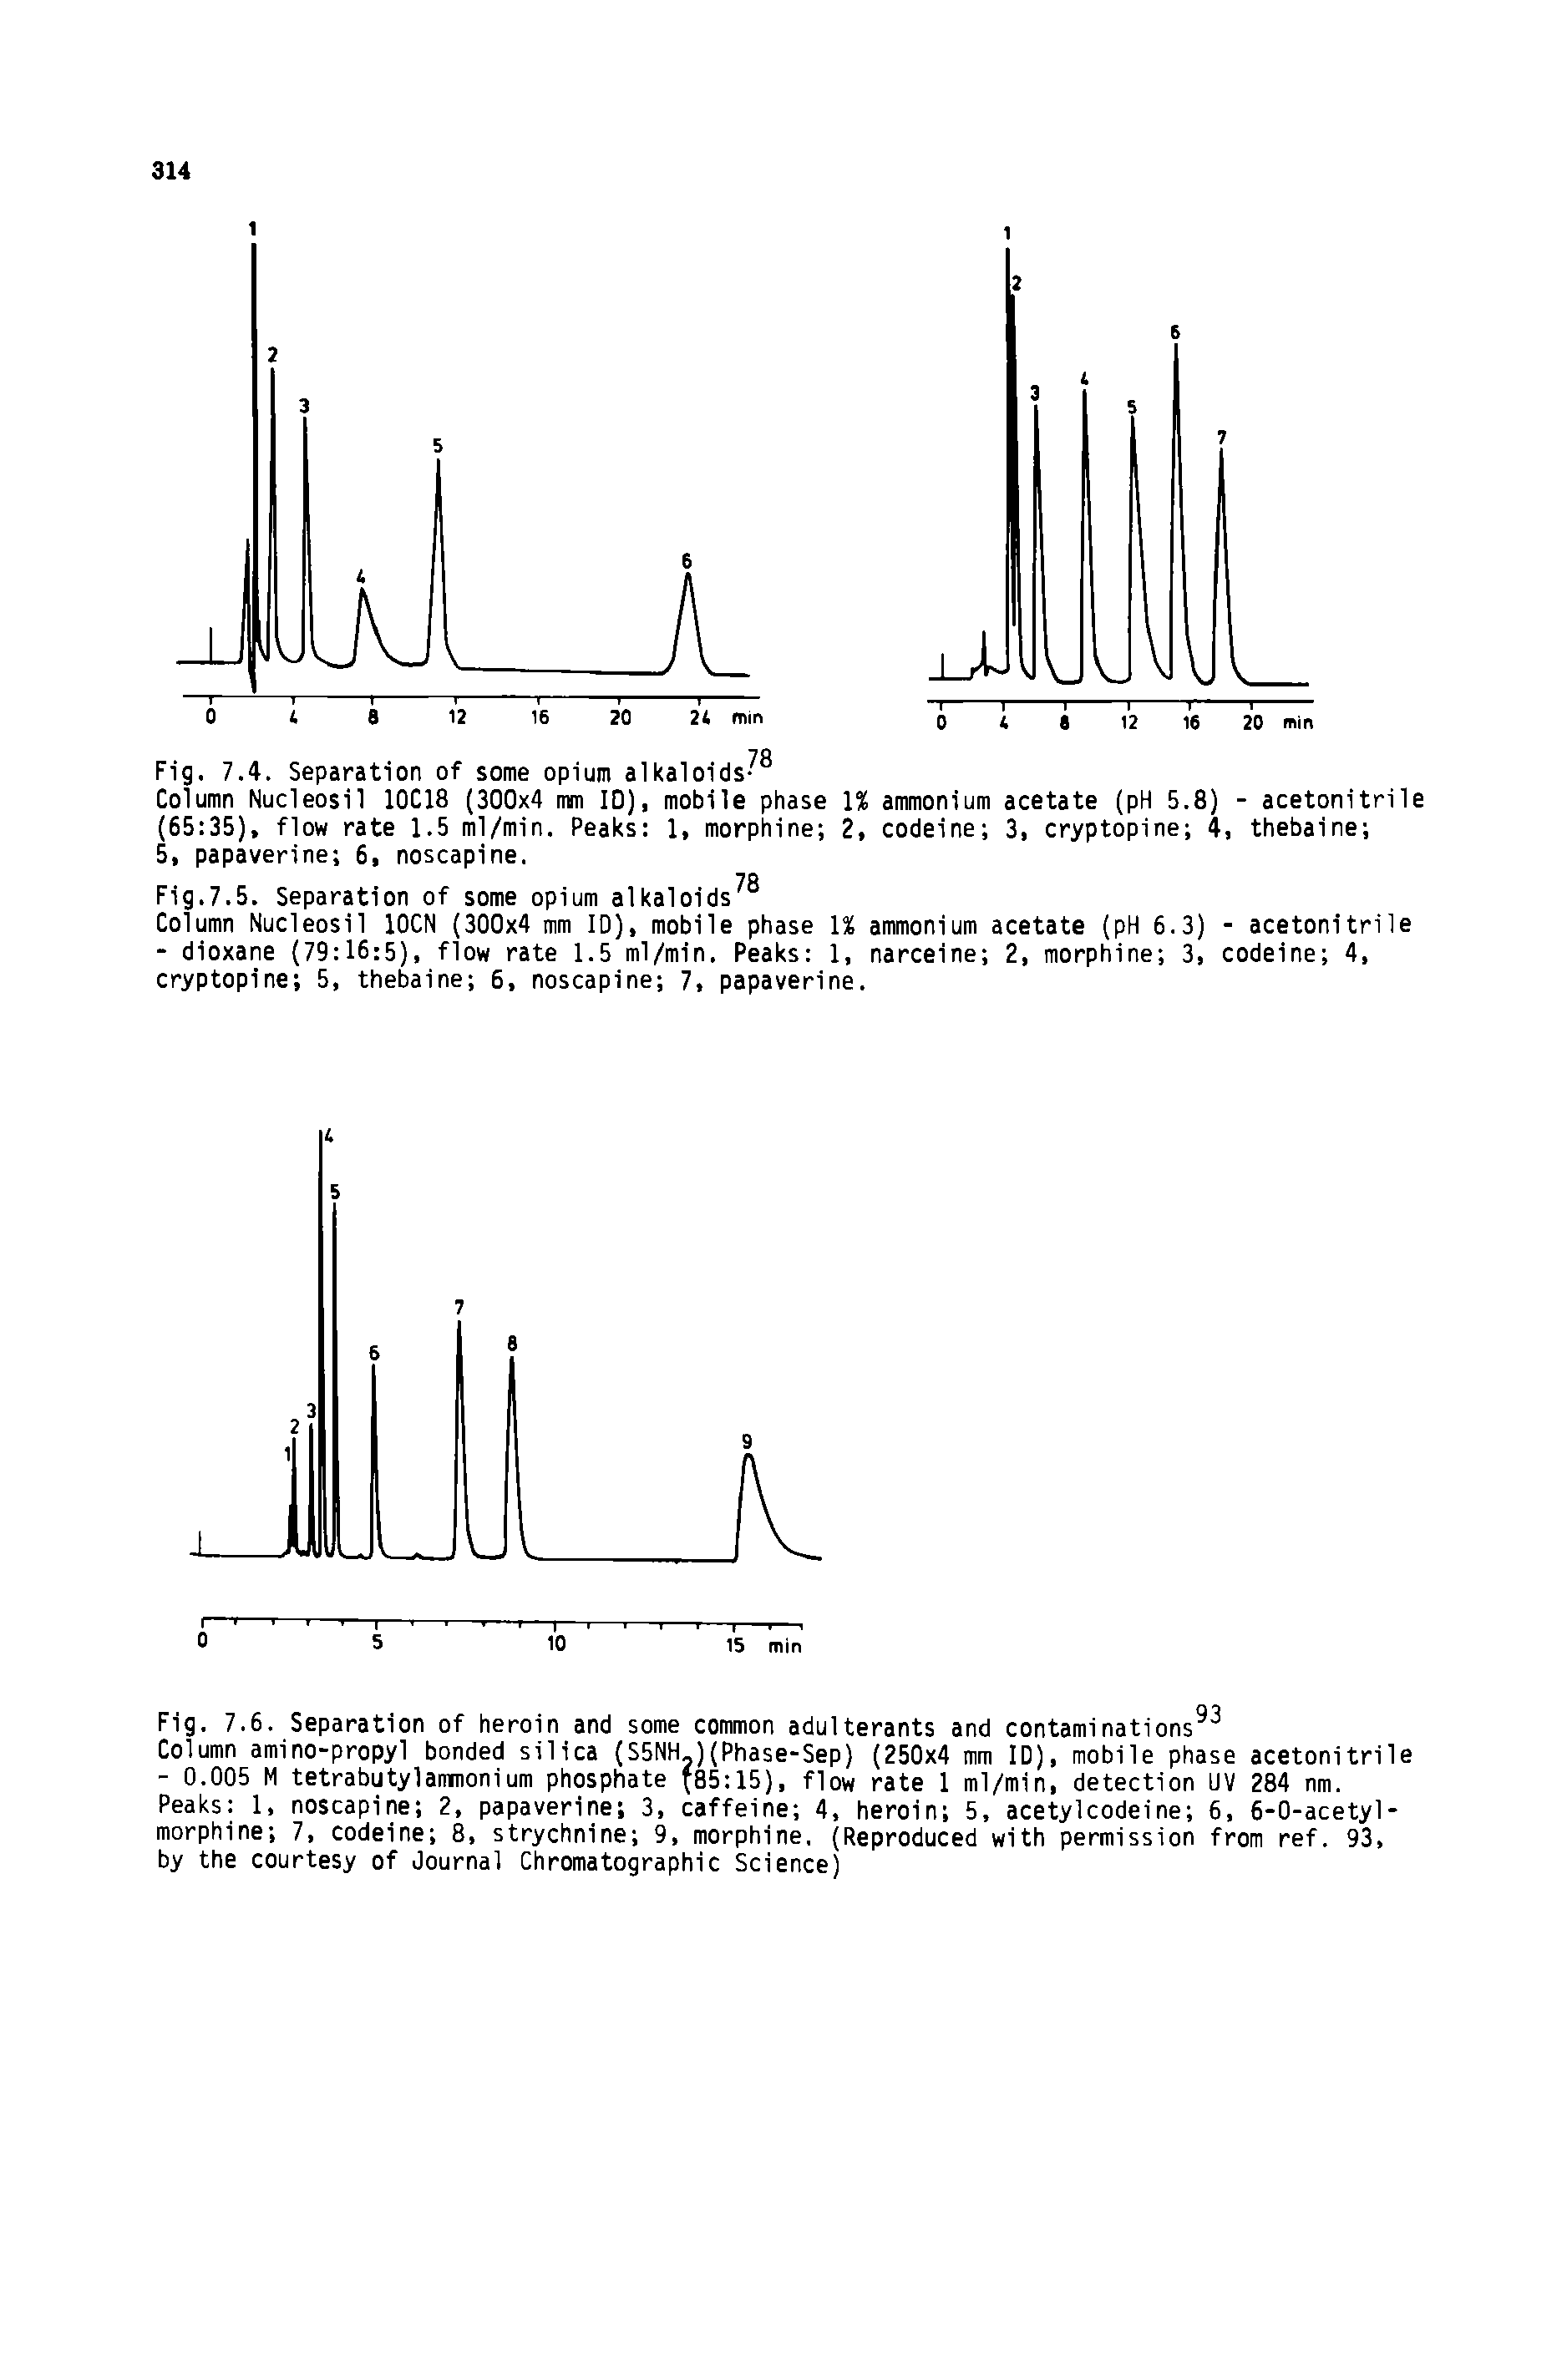 Fig. 7.4. Separation of some opium alkaloids-Column Nucleosil 10C18 (300x4 mm ID), mobile phase (65 35), flow rate 1.5 ml/min. Peaks 1, morphine 5, papaverine 6, noscapine.